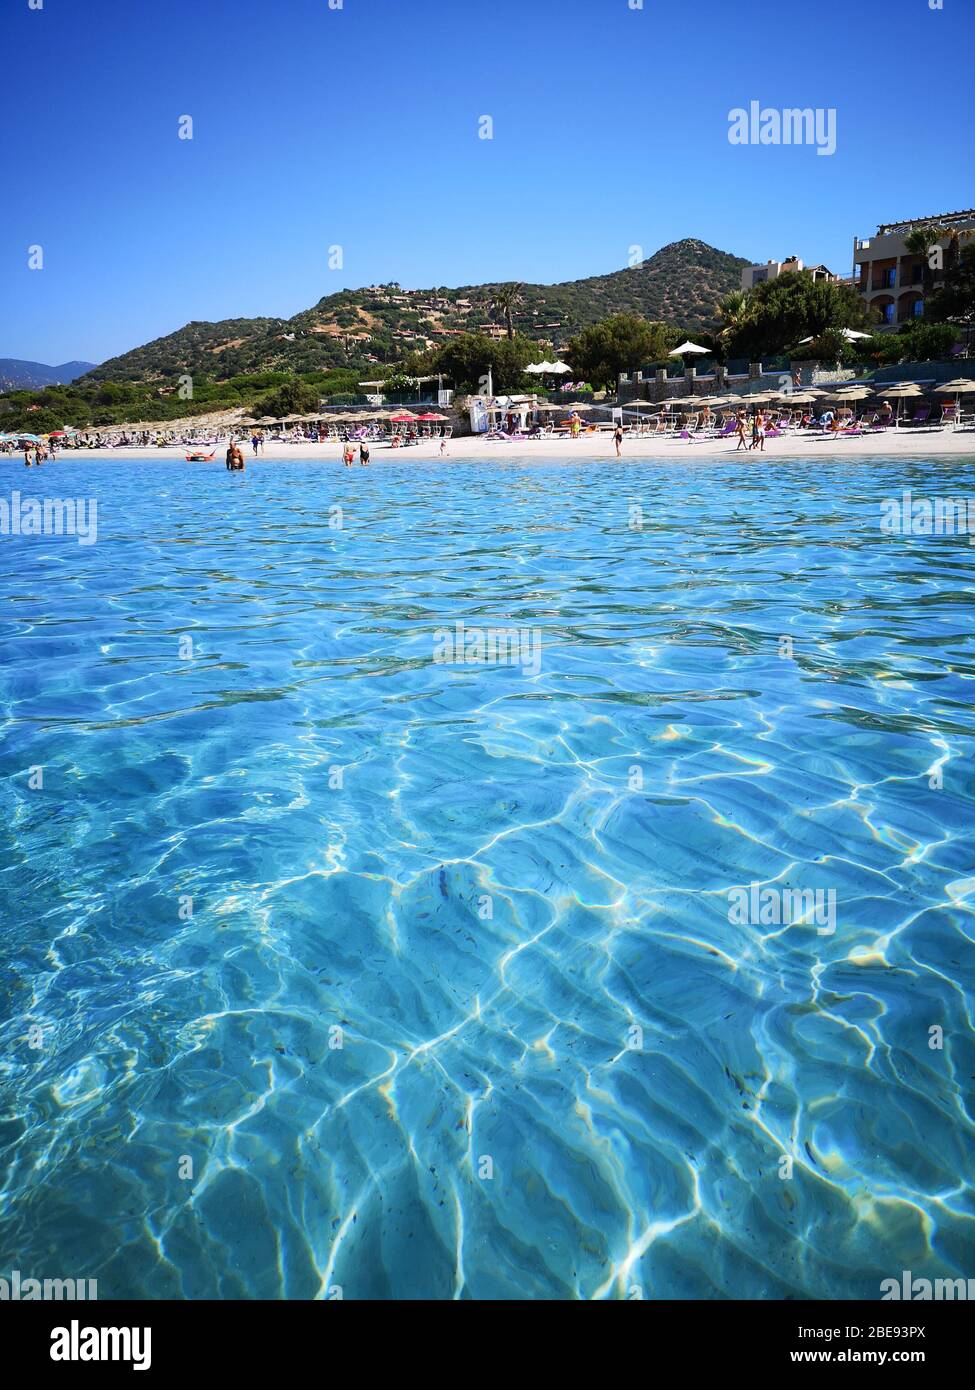 Villasimius, Italy - August 10, 2019: Blue and transparent water and the light sand of a beach in Sardinia. Stock Photo